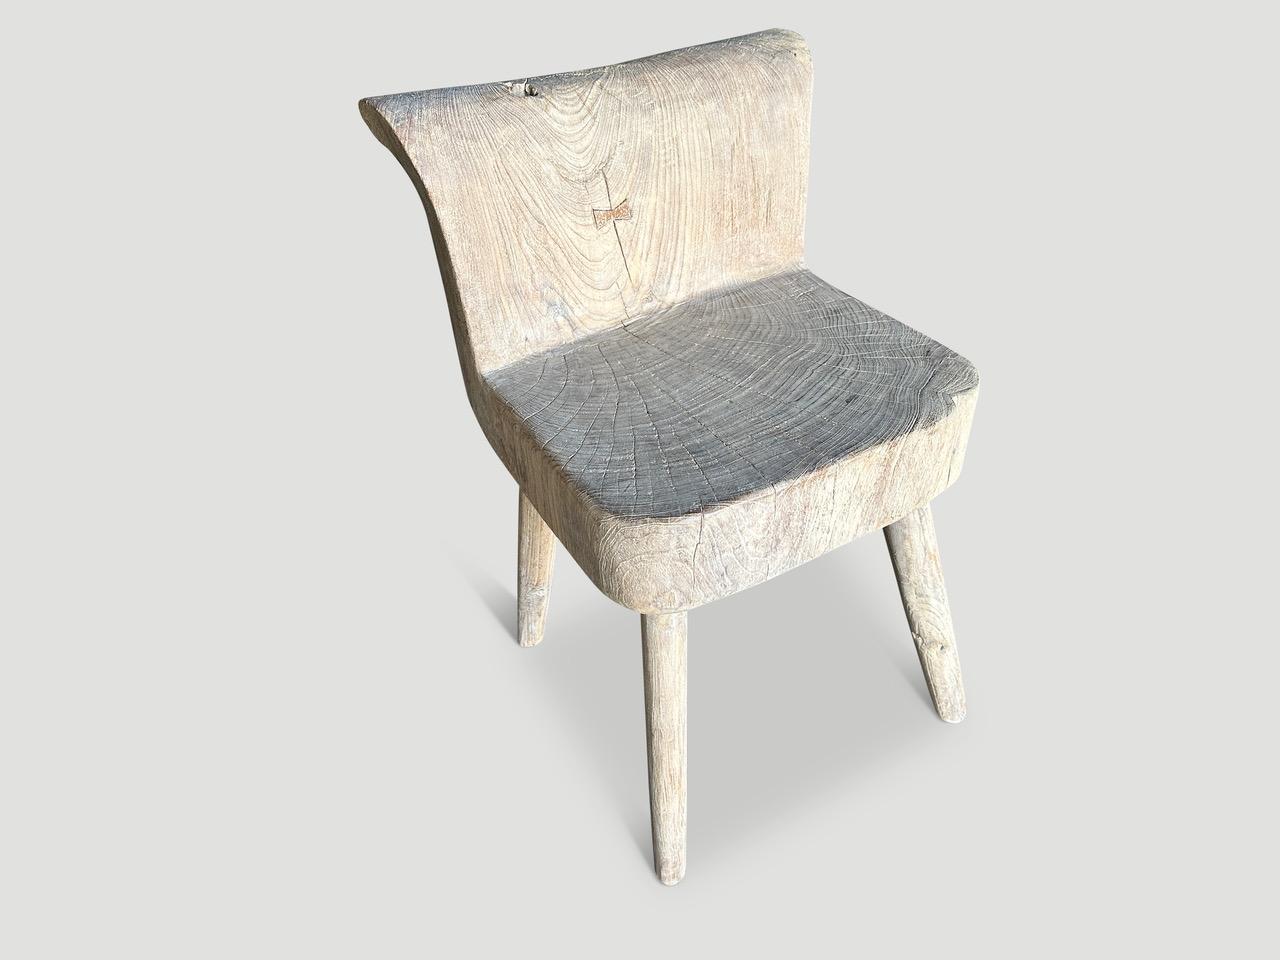 Beautiful chair hand carved from a single reclaimed teak wood block. Both usable and sculptural. This can also be used as a side table. The seat and back are one piece of wood with added four minimalist cylinder legs. The stunning patina and grain